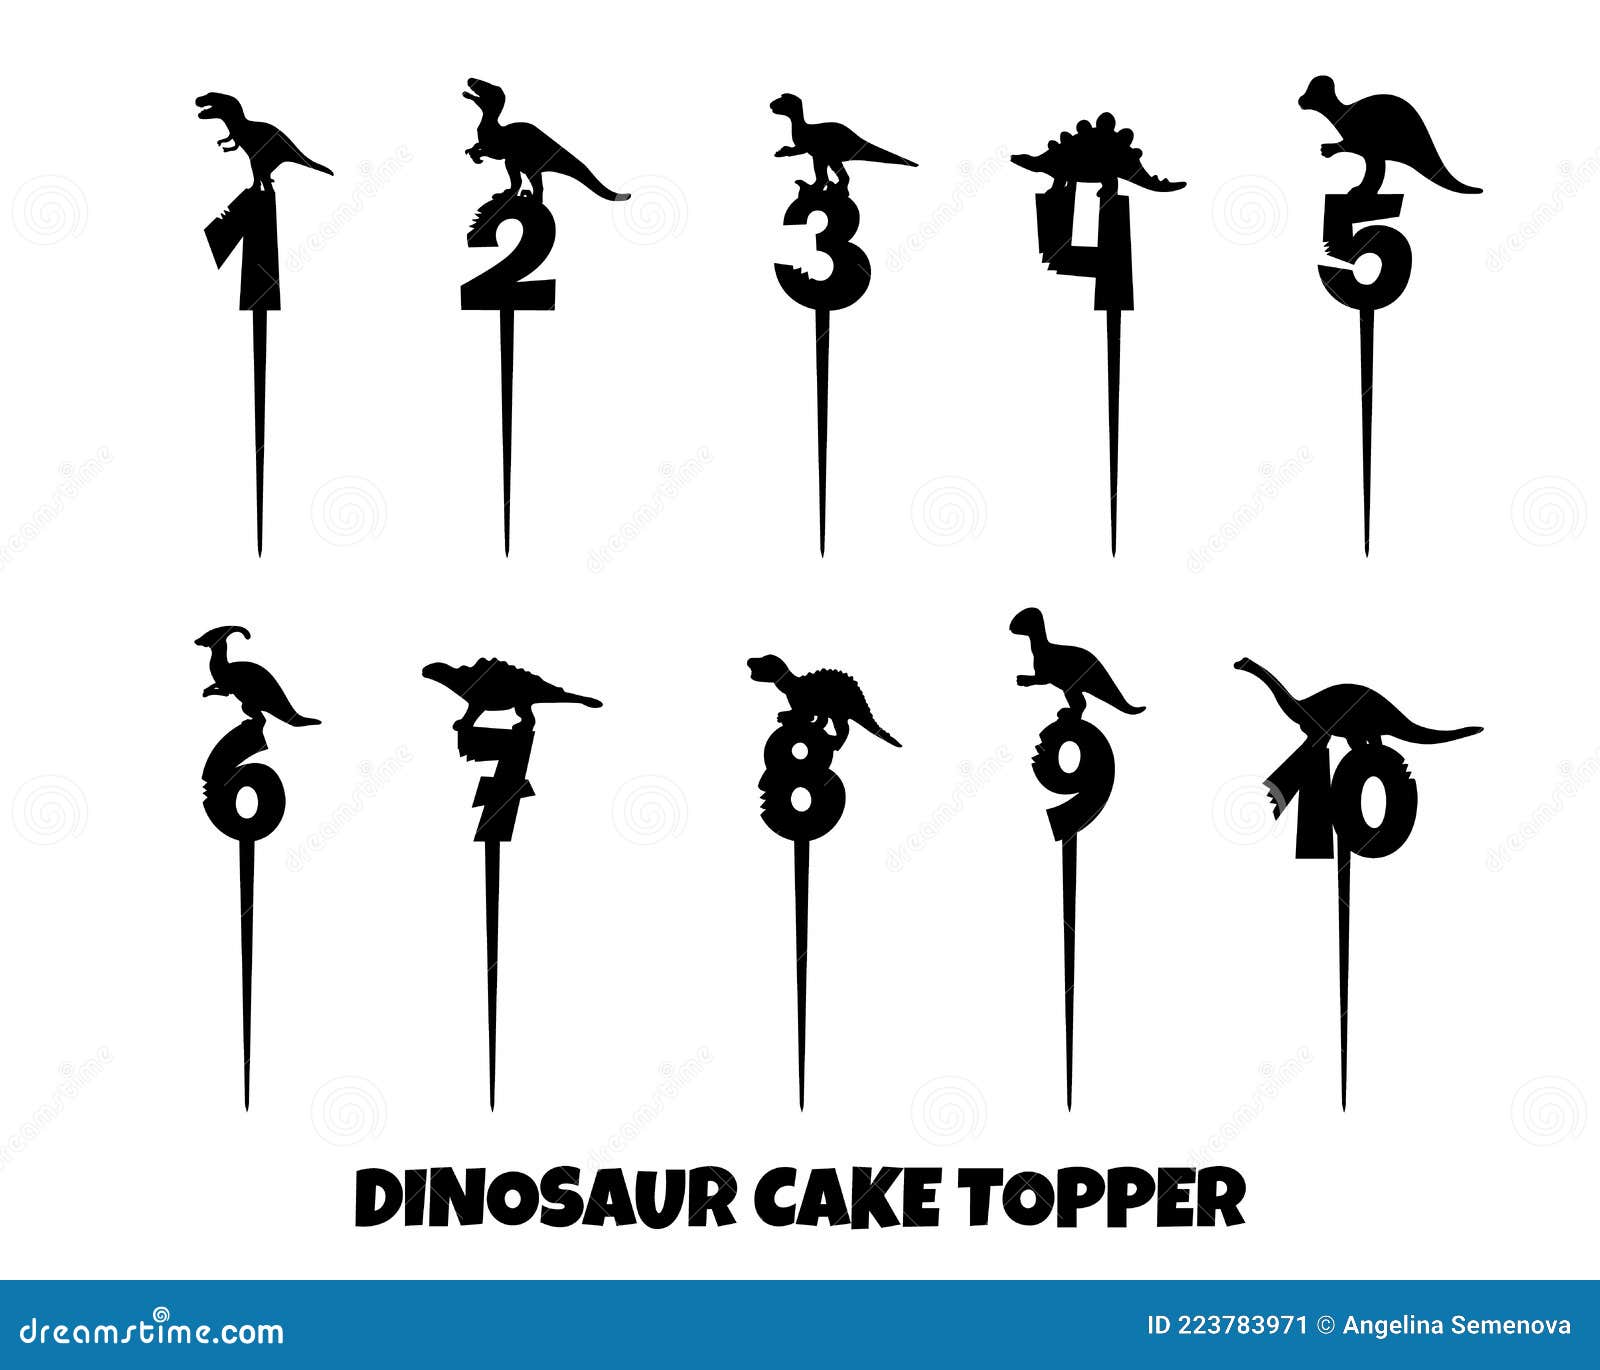 cake topper with ten numbers and dinosaur silhouettes.   for laser cut machines. decor for pie